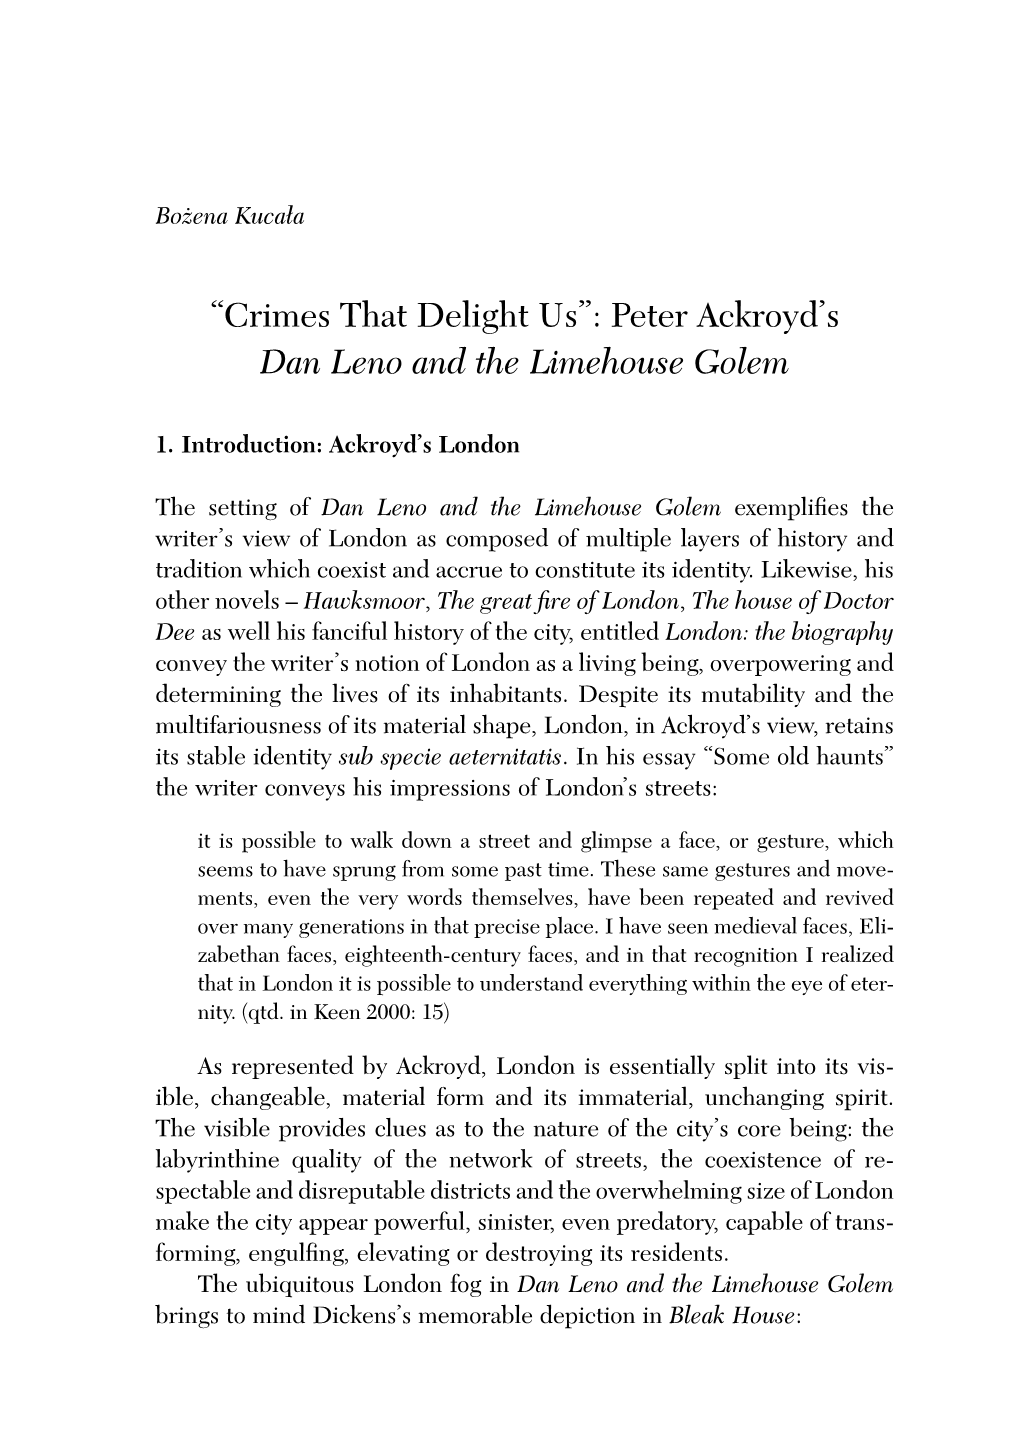 Peter Ackroyd's Dan Leno and the Limehouse Golem